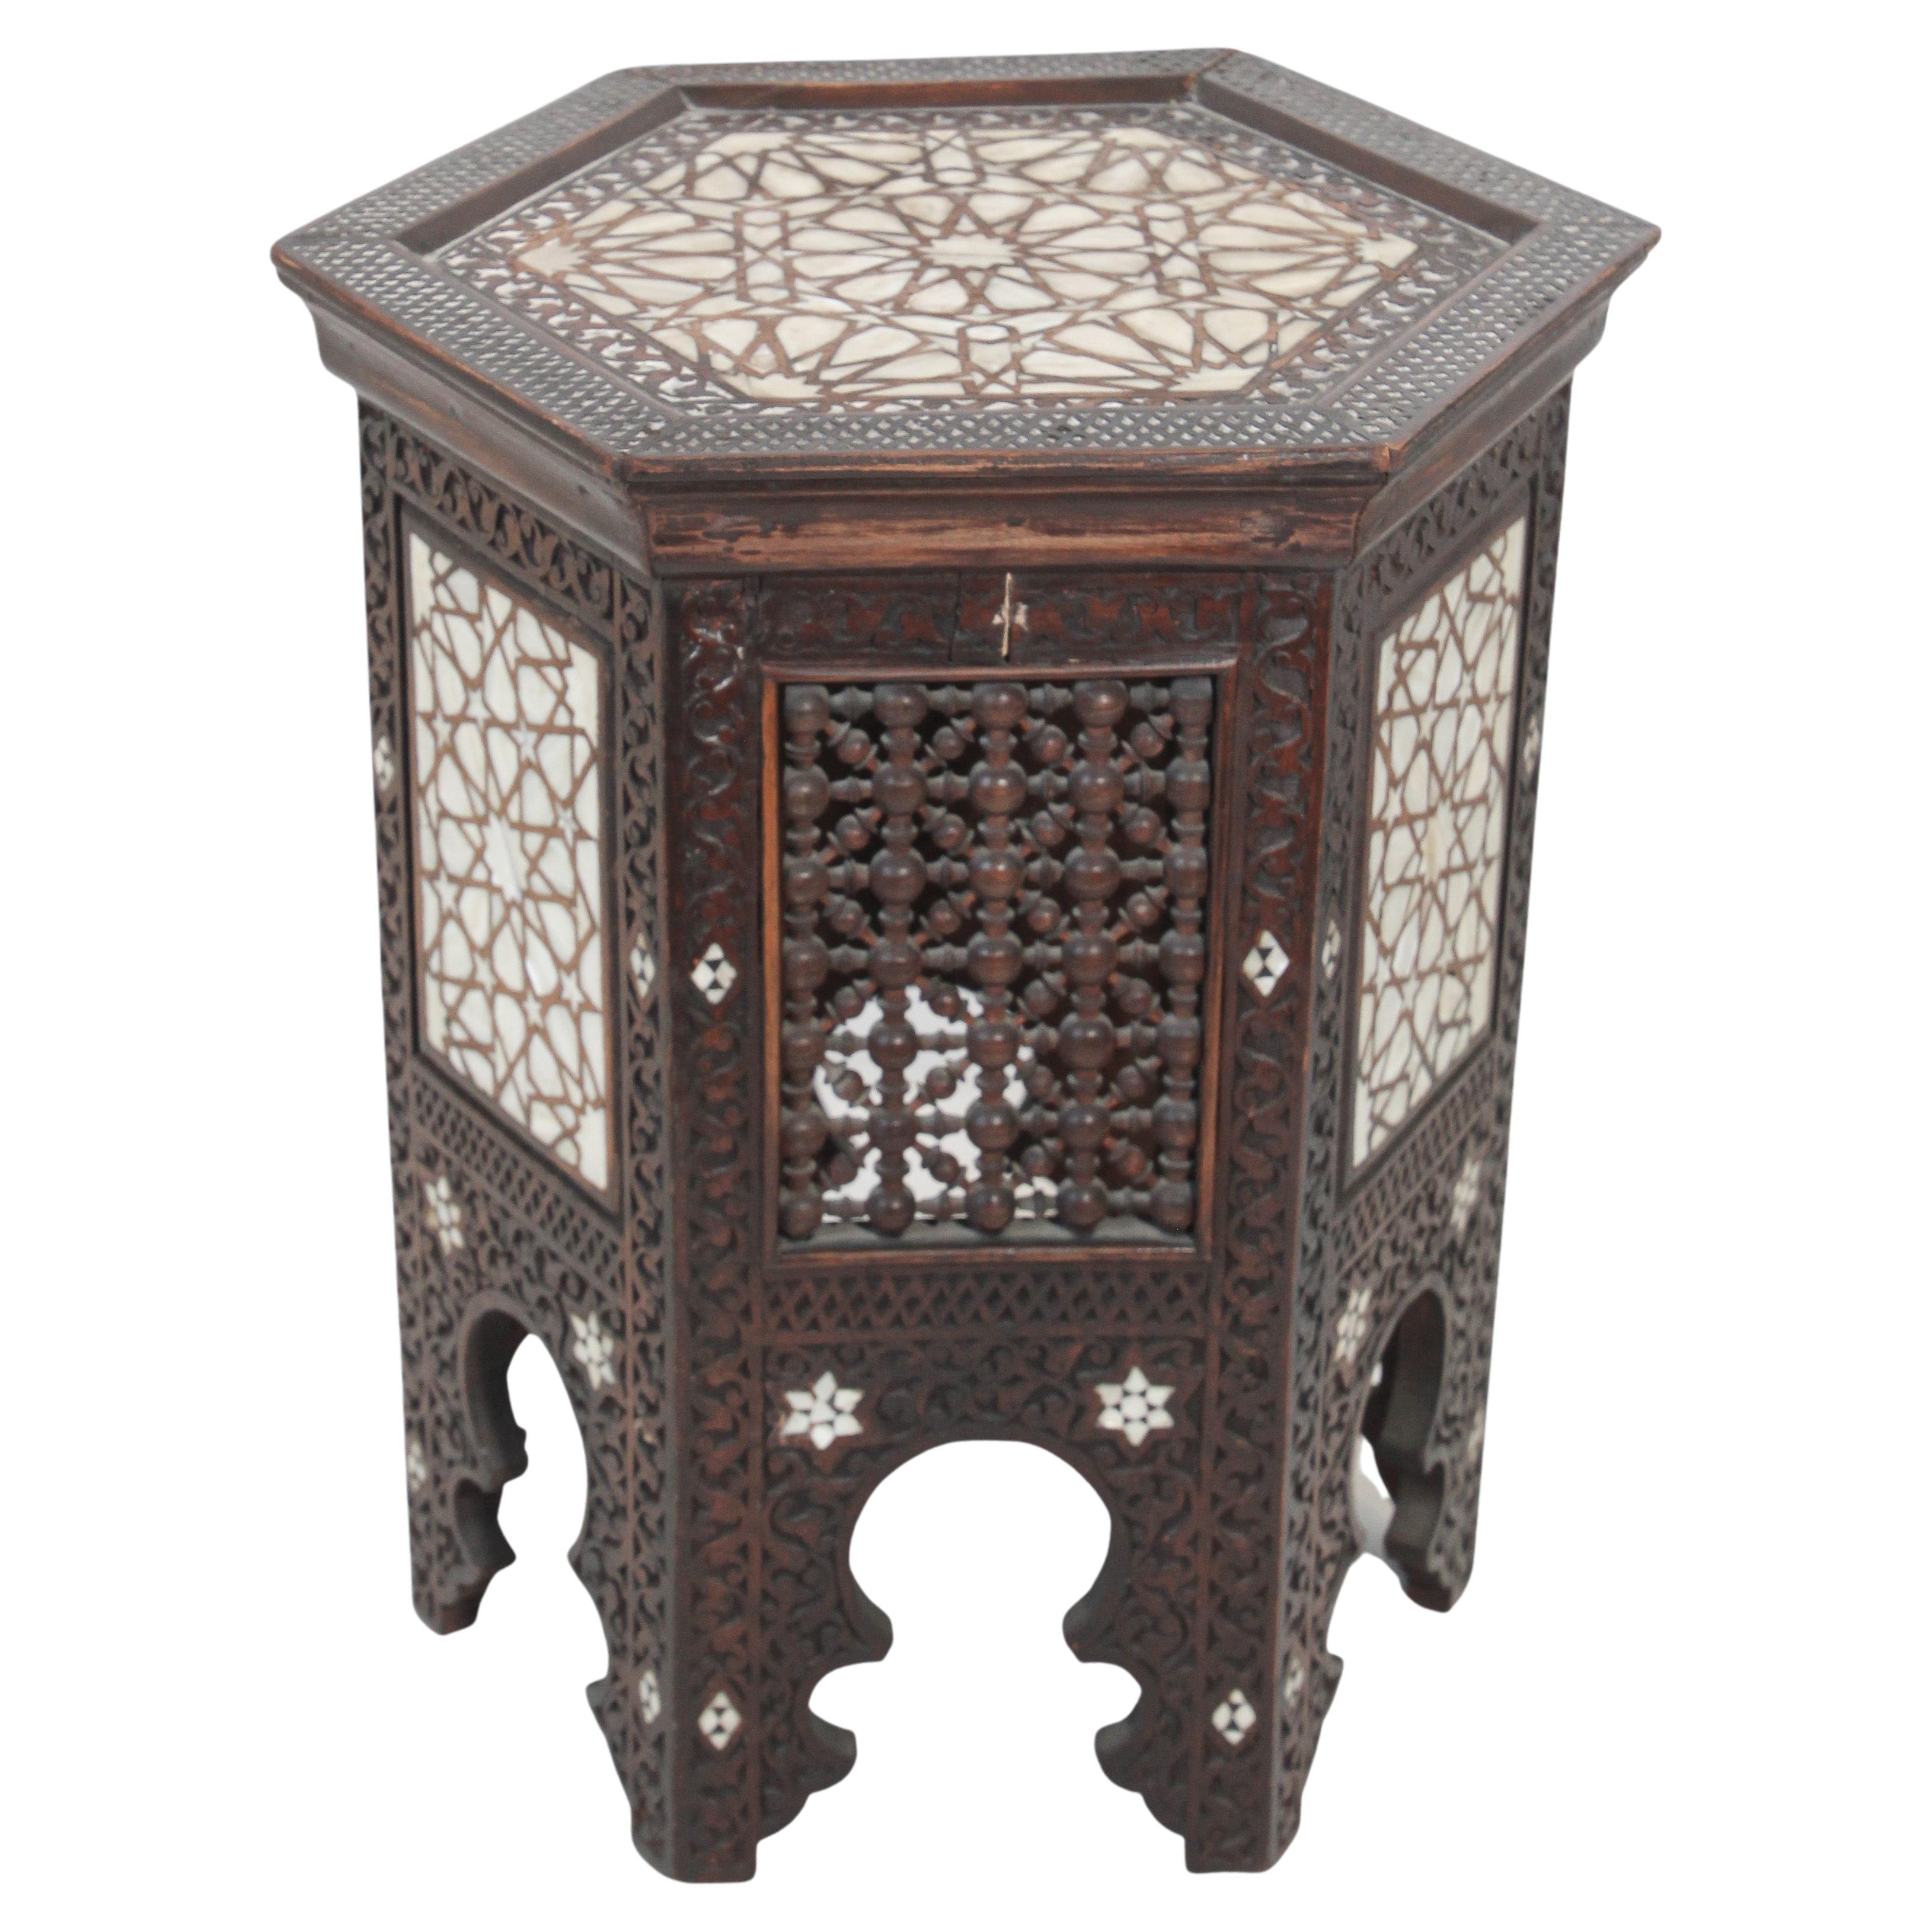 19th Century Moorish Mother-of-pearl Inlaid Side Table